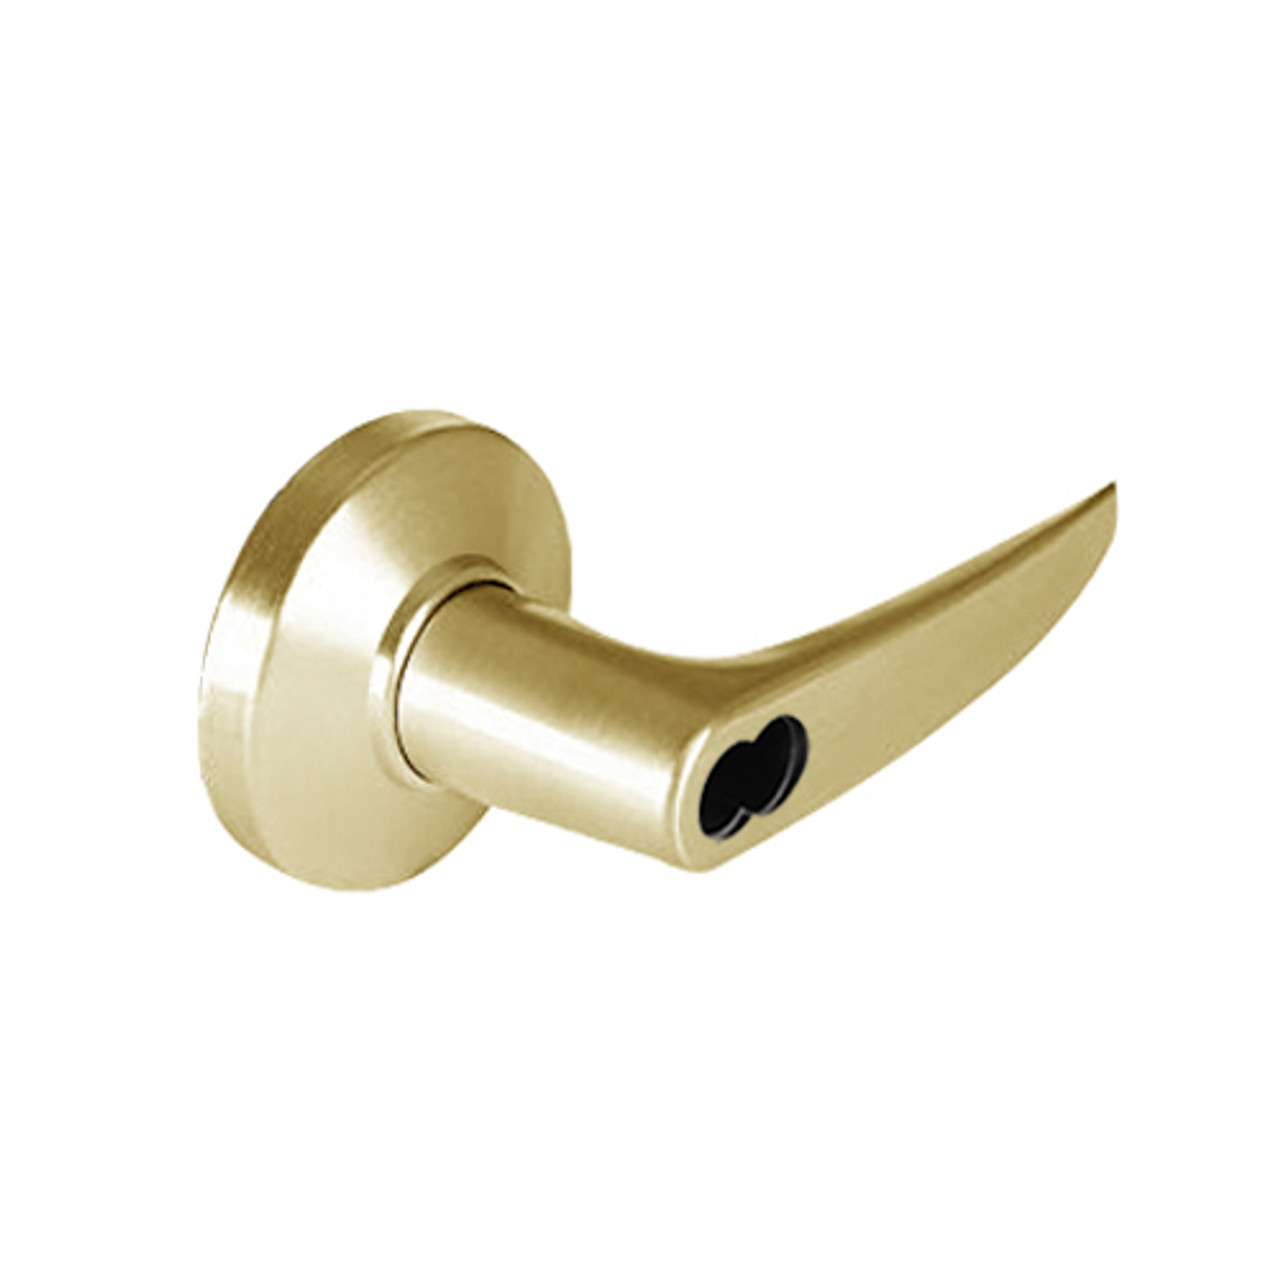 9K47T16CSTK606LM Best 9K Series Dormitory Cylindrical Lever Locks with Curved without Return Lever Design Accept 7 Pin Best Core in Satin Brass